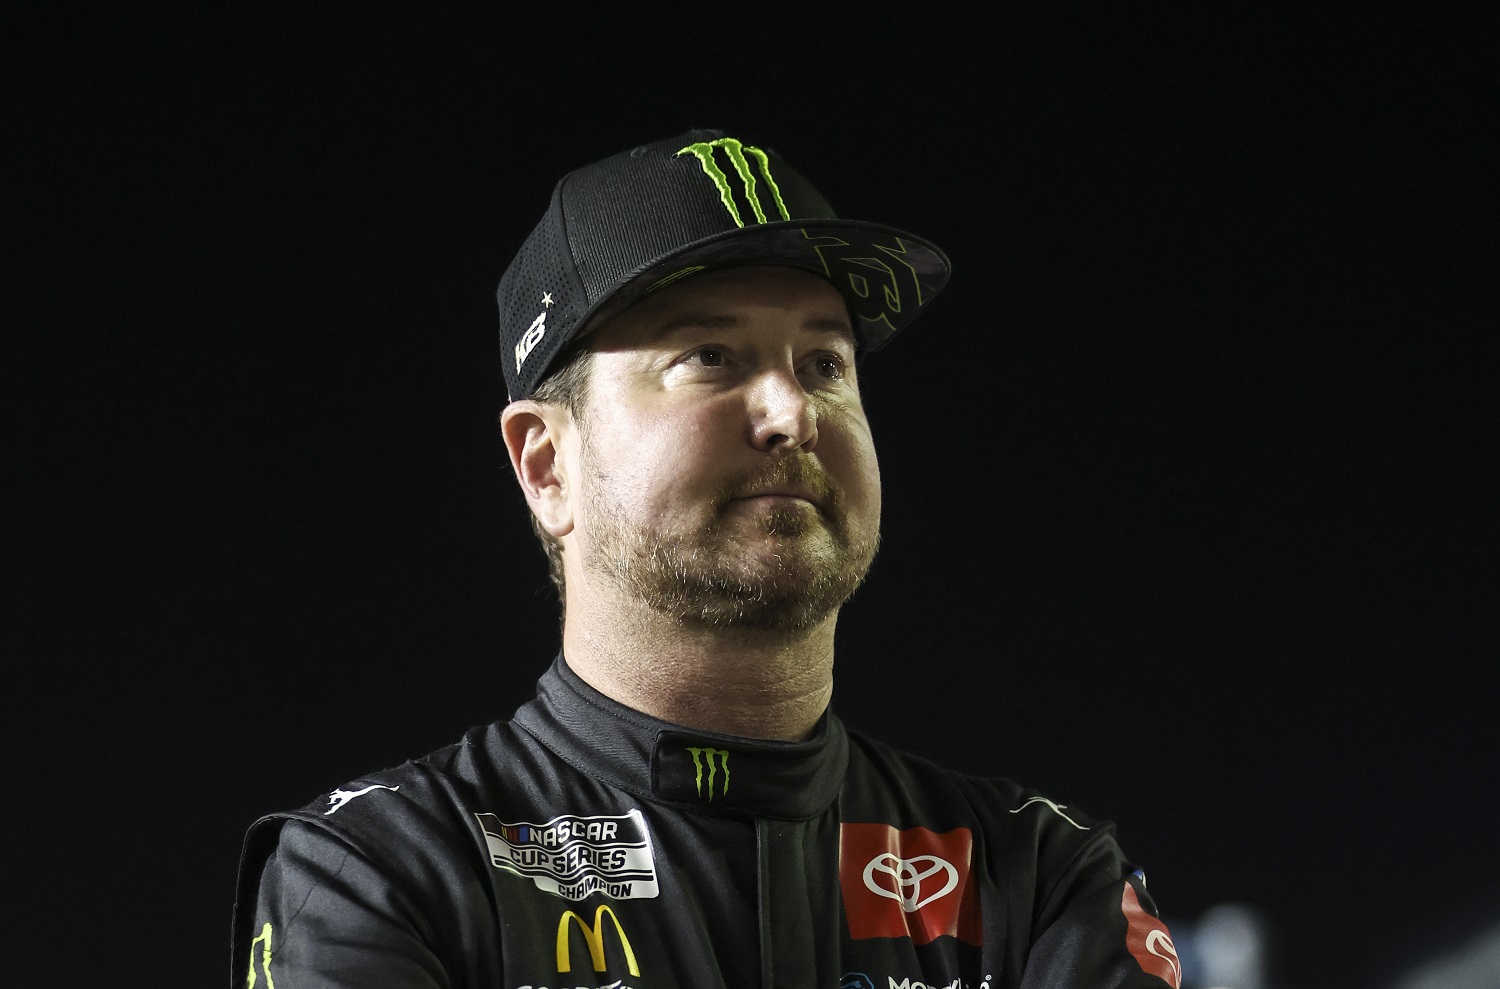 Kurt Busch’s Woes Confirm 23XI Racing Is So 2021-ish Compared to Upstart Trackhouse Racing in the Cup Series